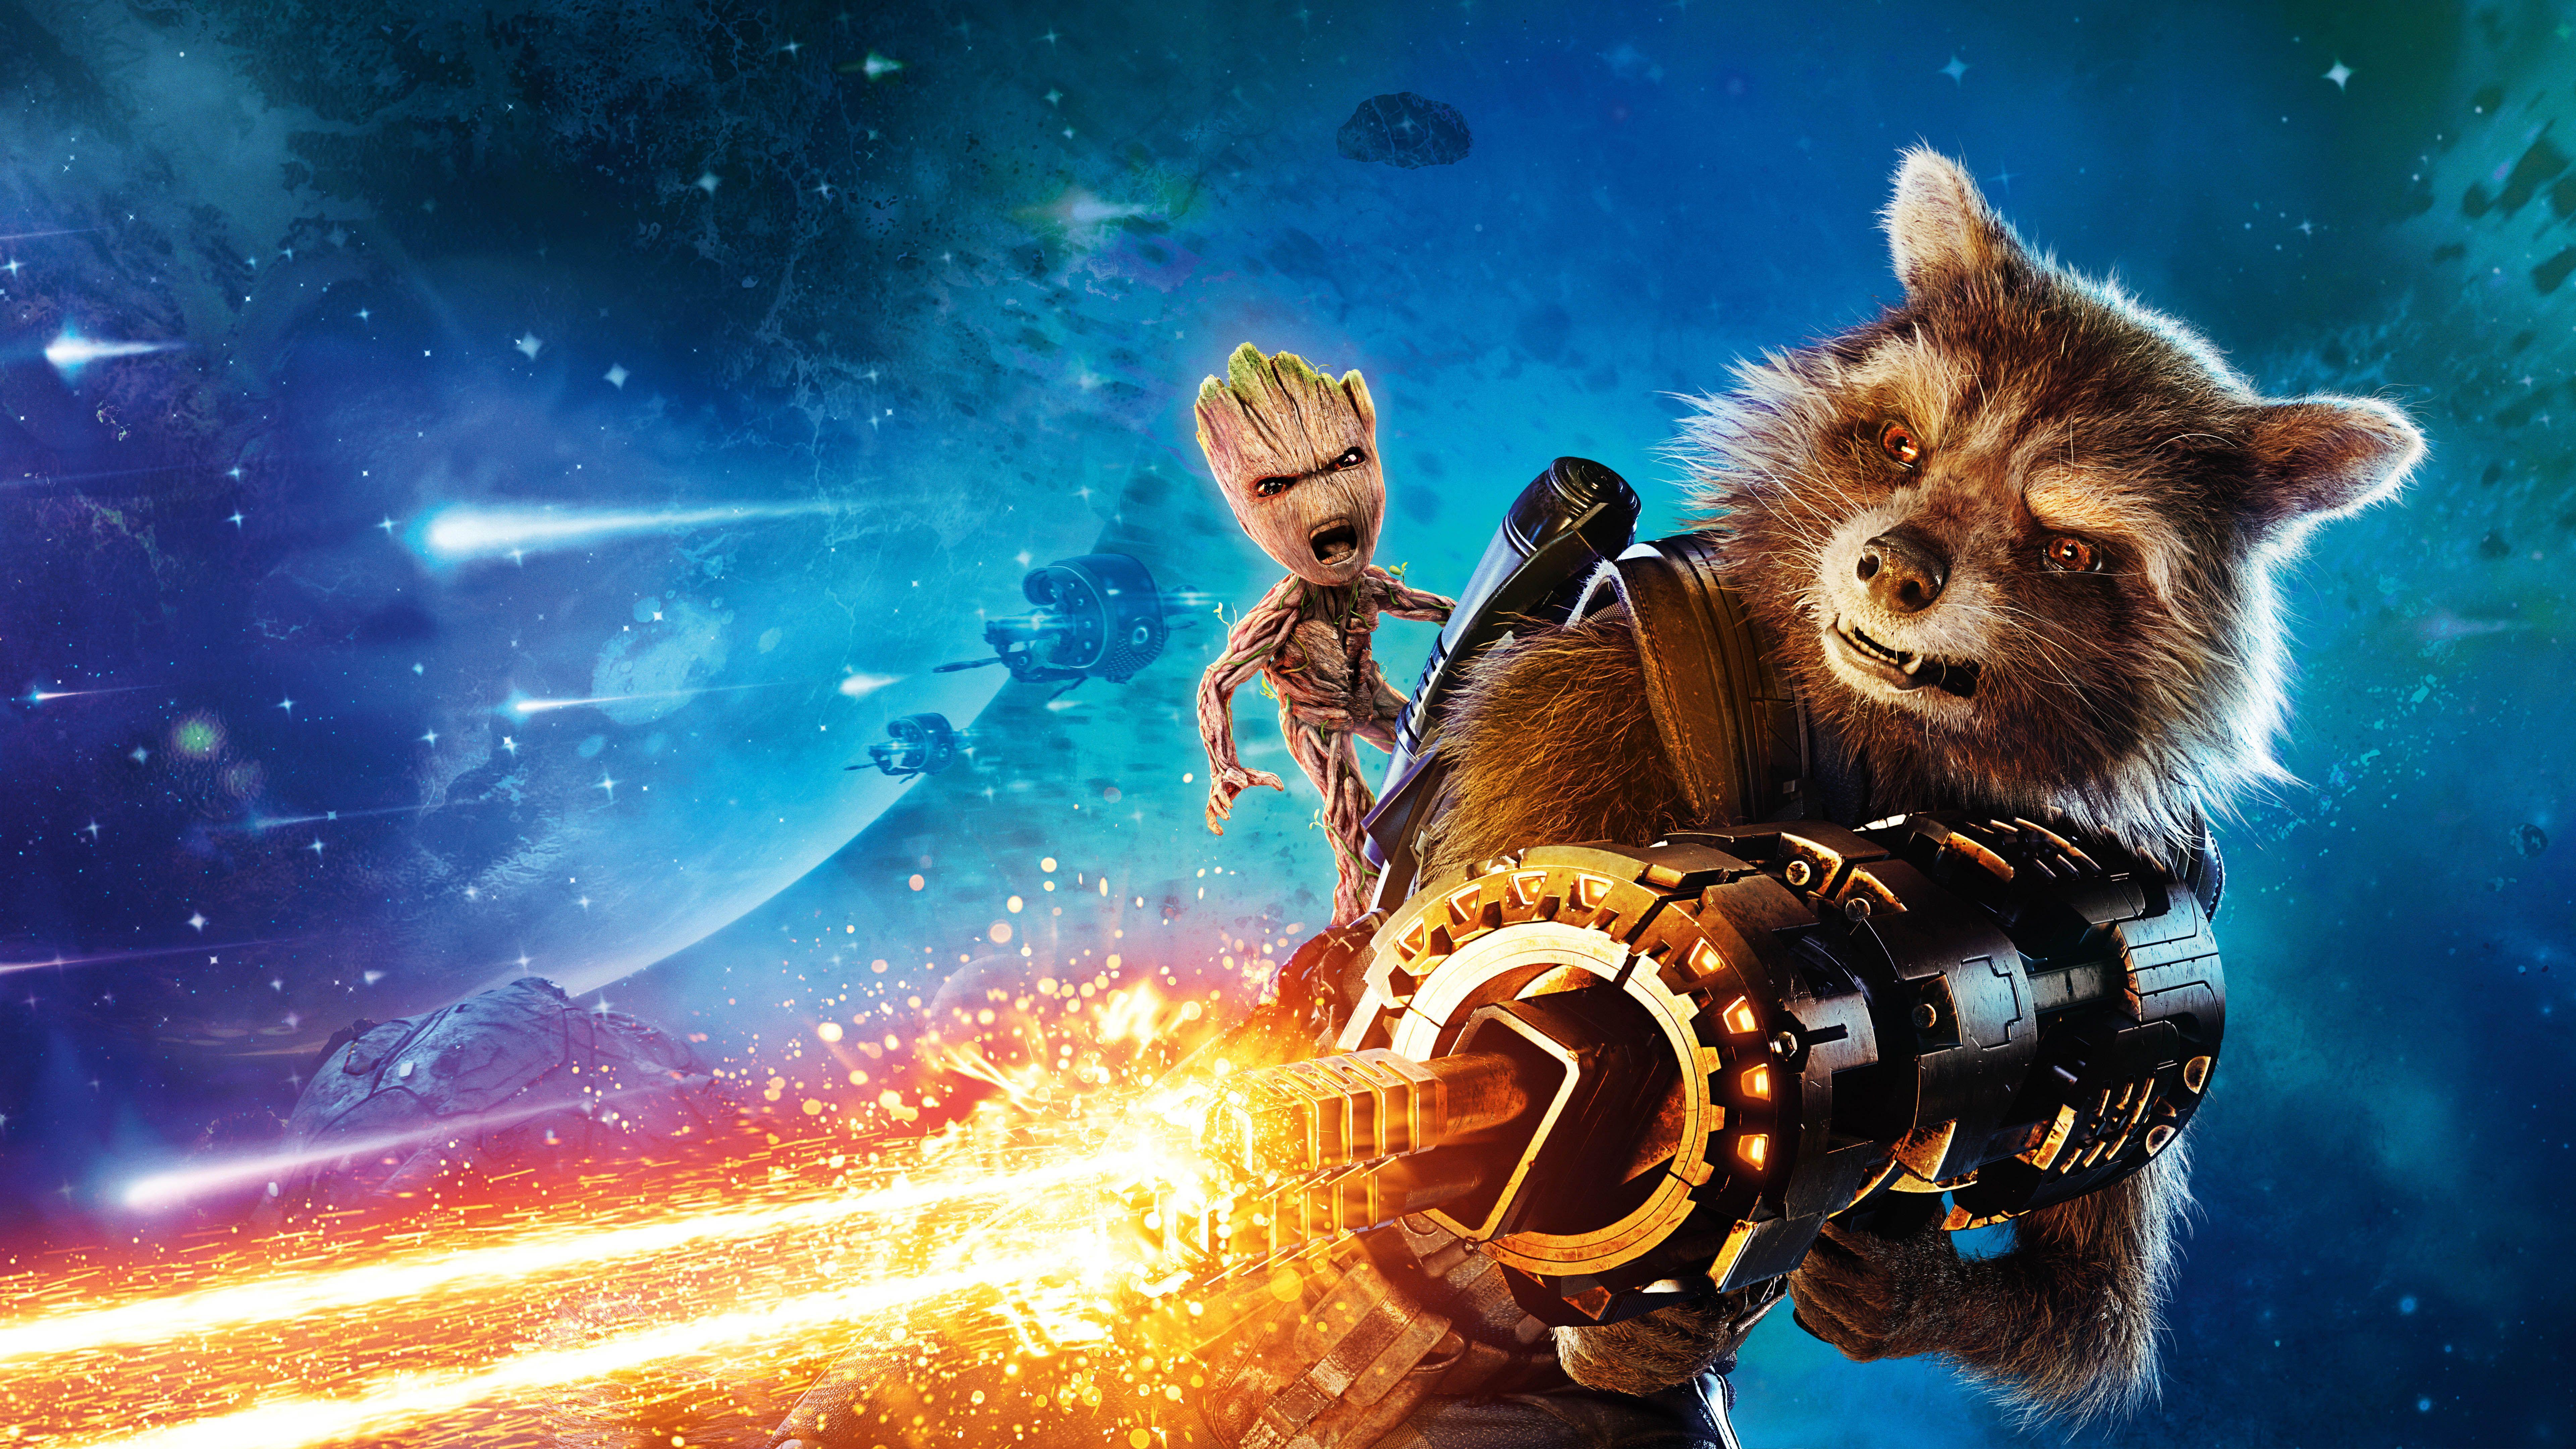 Guardians Of The Galaxy Vol. 2 Best Selected Wallpaper 2017